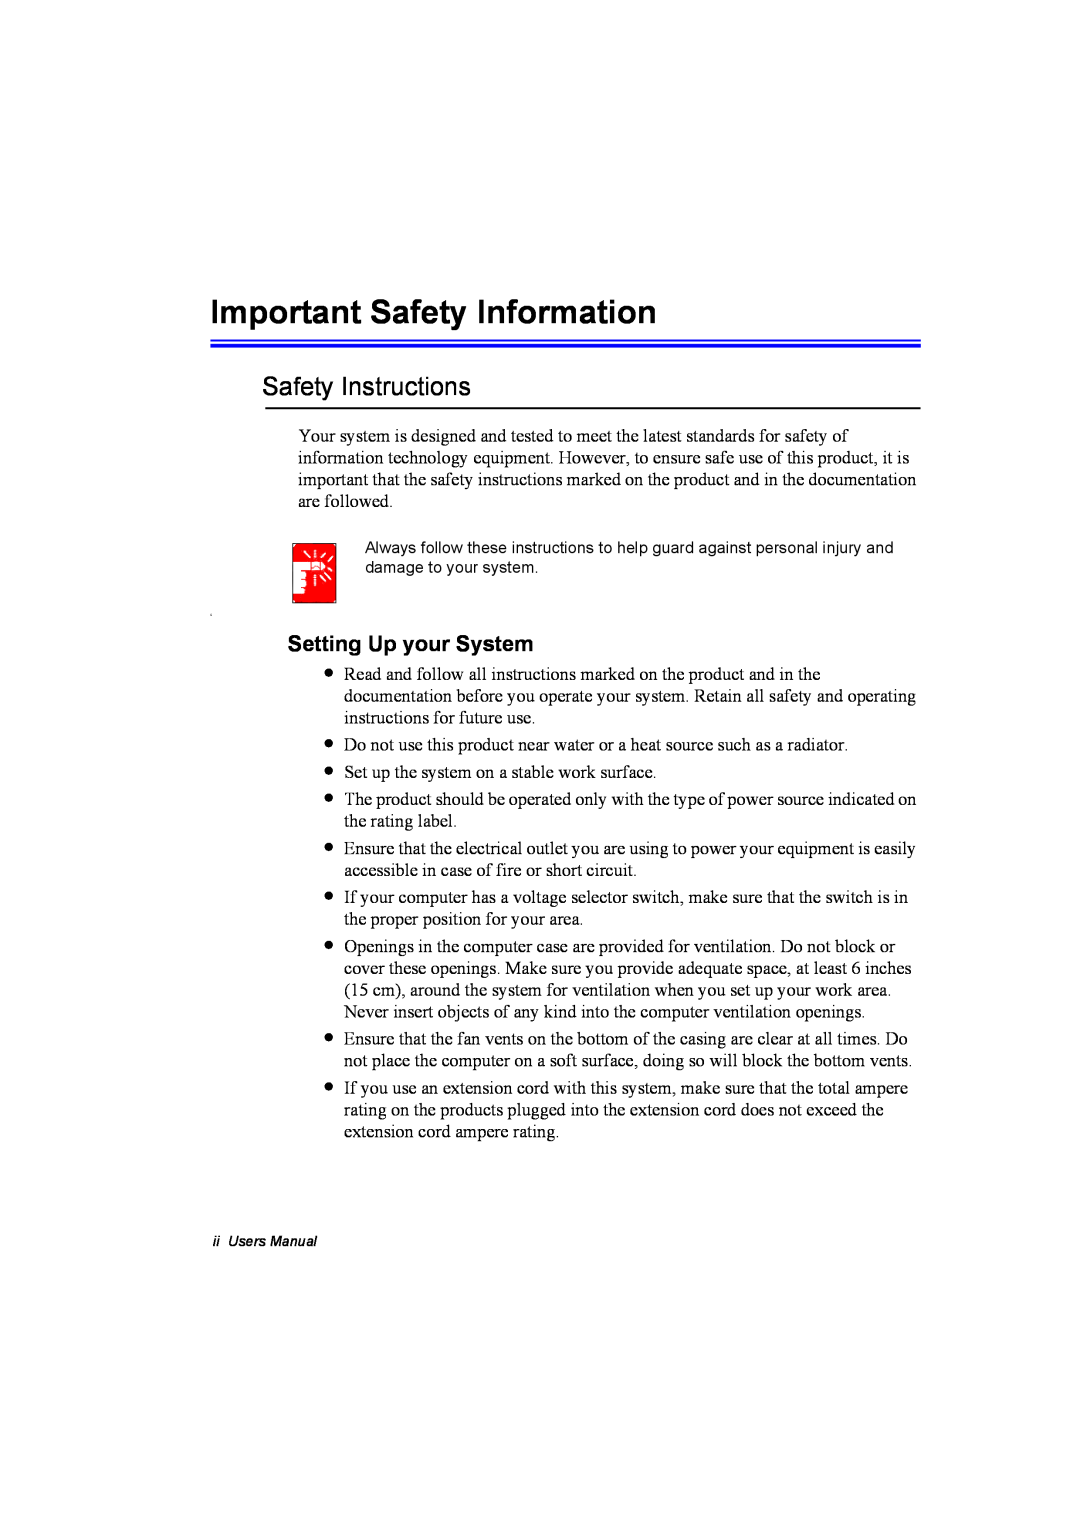 Samsung NX10RP0BW9/SEG, EV-NX10ZZBABZA manual Important Safety Information, Safety Instructions, Setting Up your System 